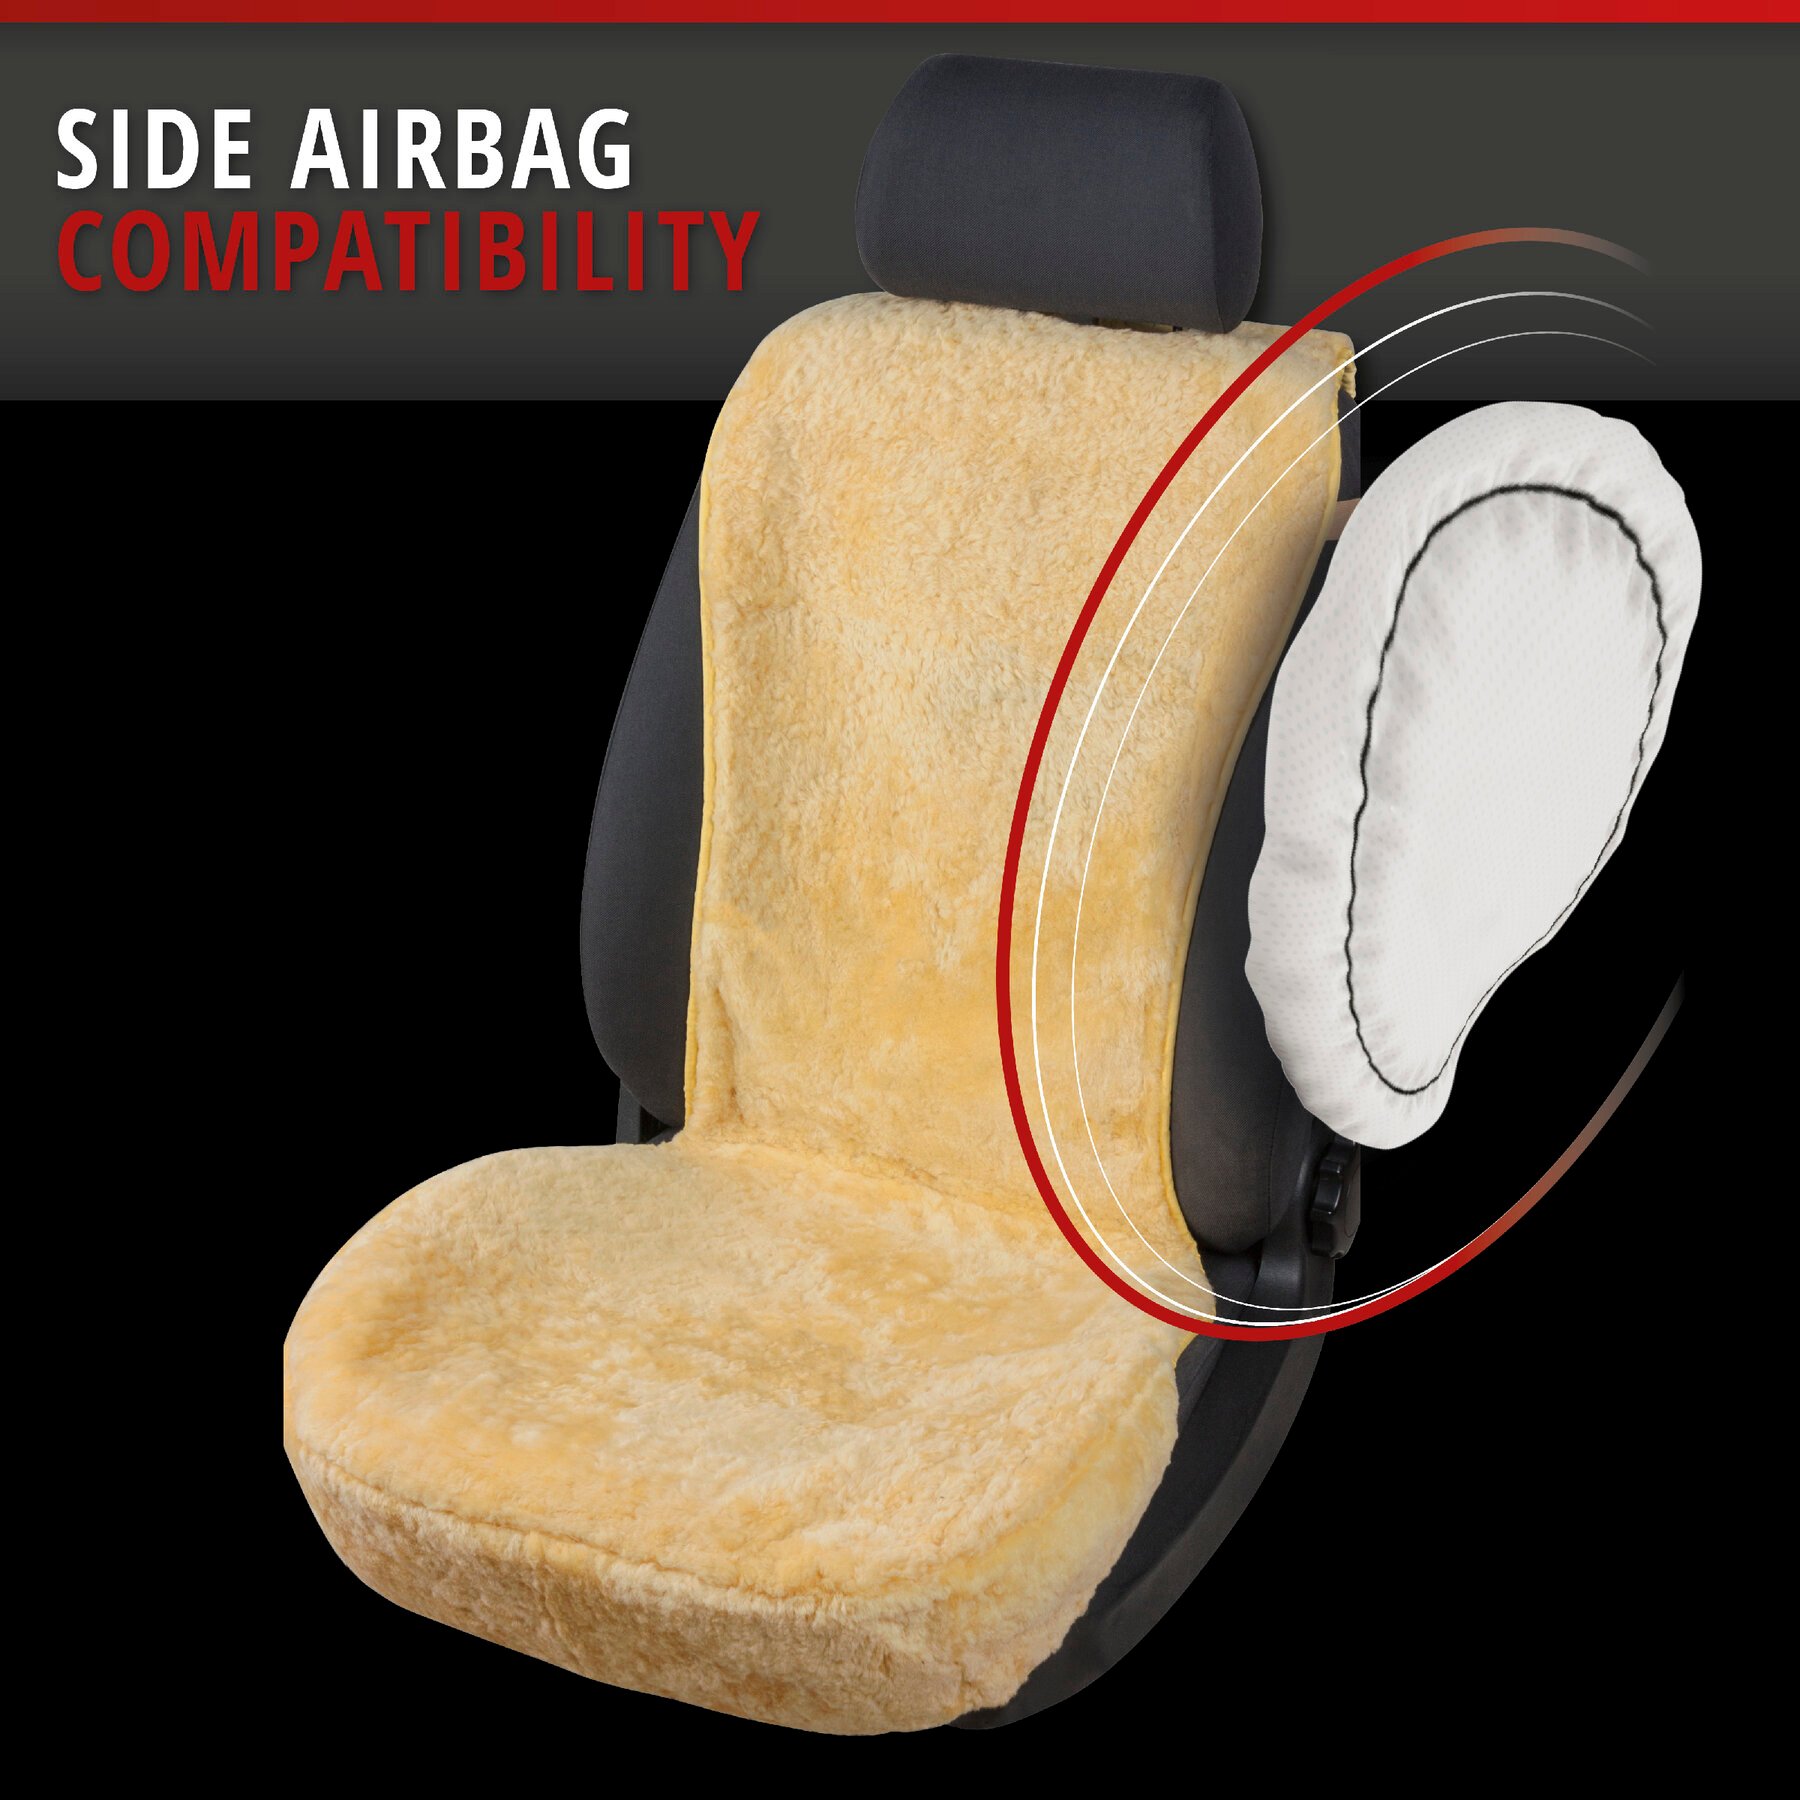 Car Seat cover made of lambskin Vogue beige 16-18mm fur height